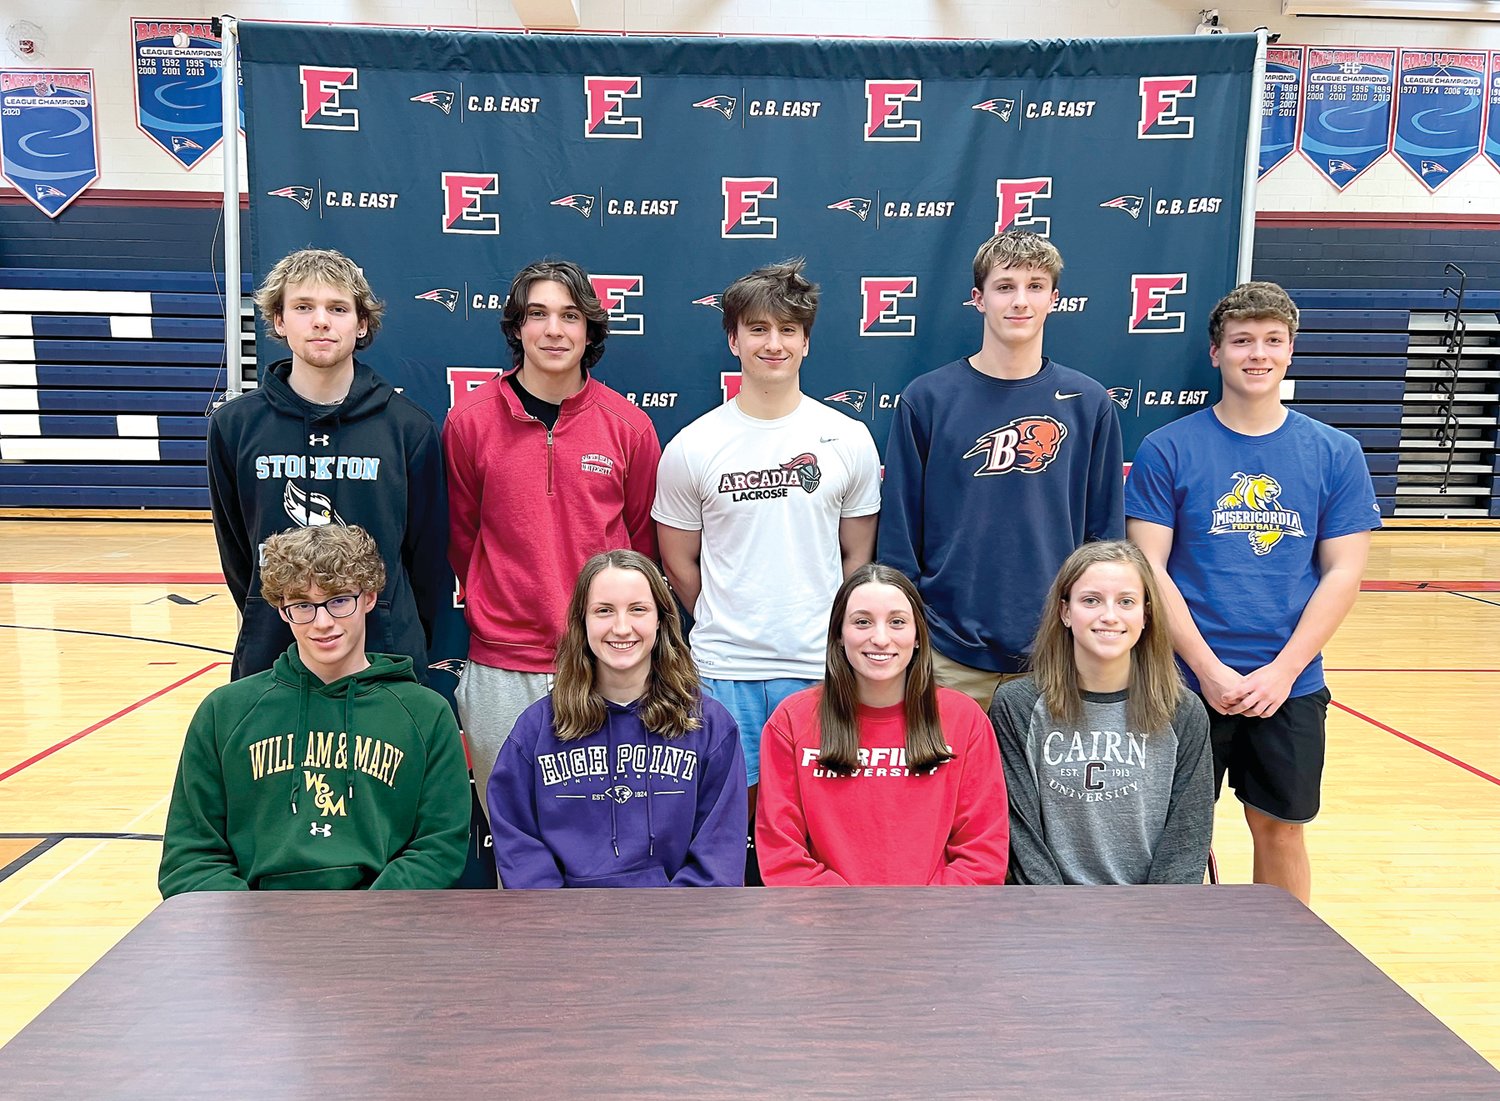 Nine CB East seniors were recognized for their commitemnt to play collegiate sports on Feb. 23. From left are: front row, Zach LeMay, Jillian Thorning, Abbie DiGregorio, Reagan Griffith; back row, Christopher Funston, Ethan Greenlee, Adrien Widdows, Connor Thurston and Sean Kerrigan.